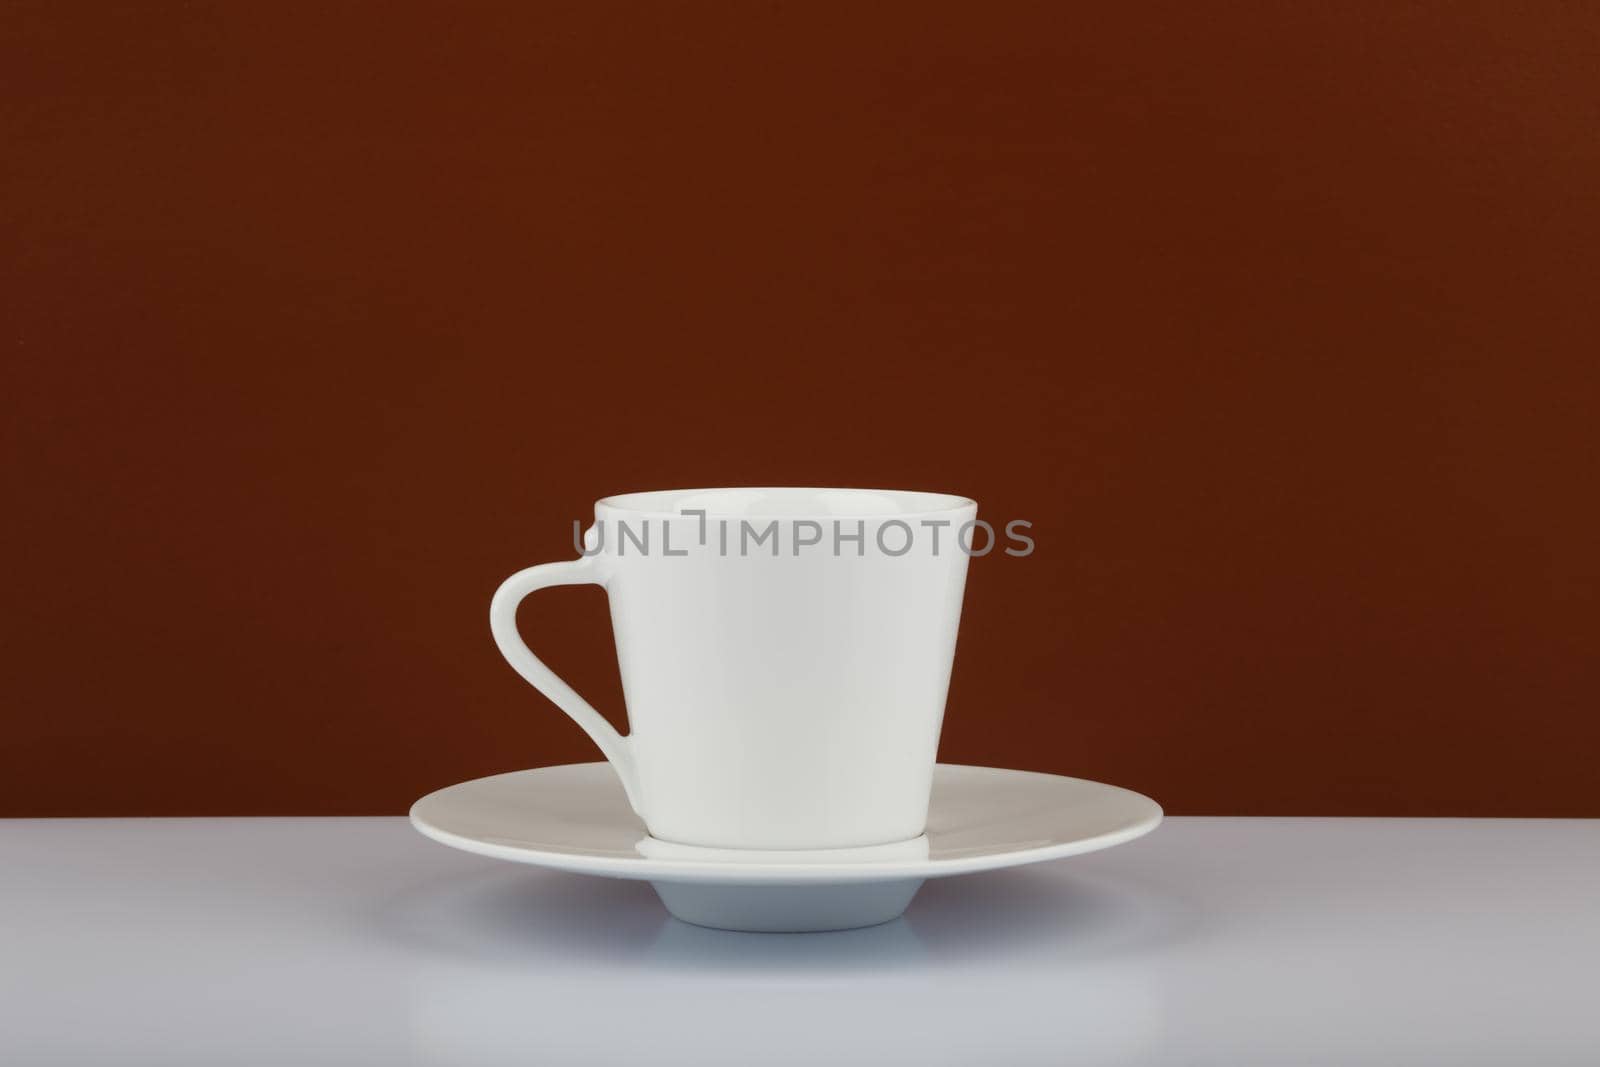 White shiny coffee cup on a plate on white table against brown background with copy space by Senorina_Irina